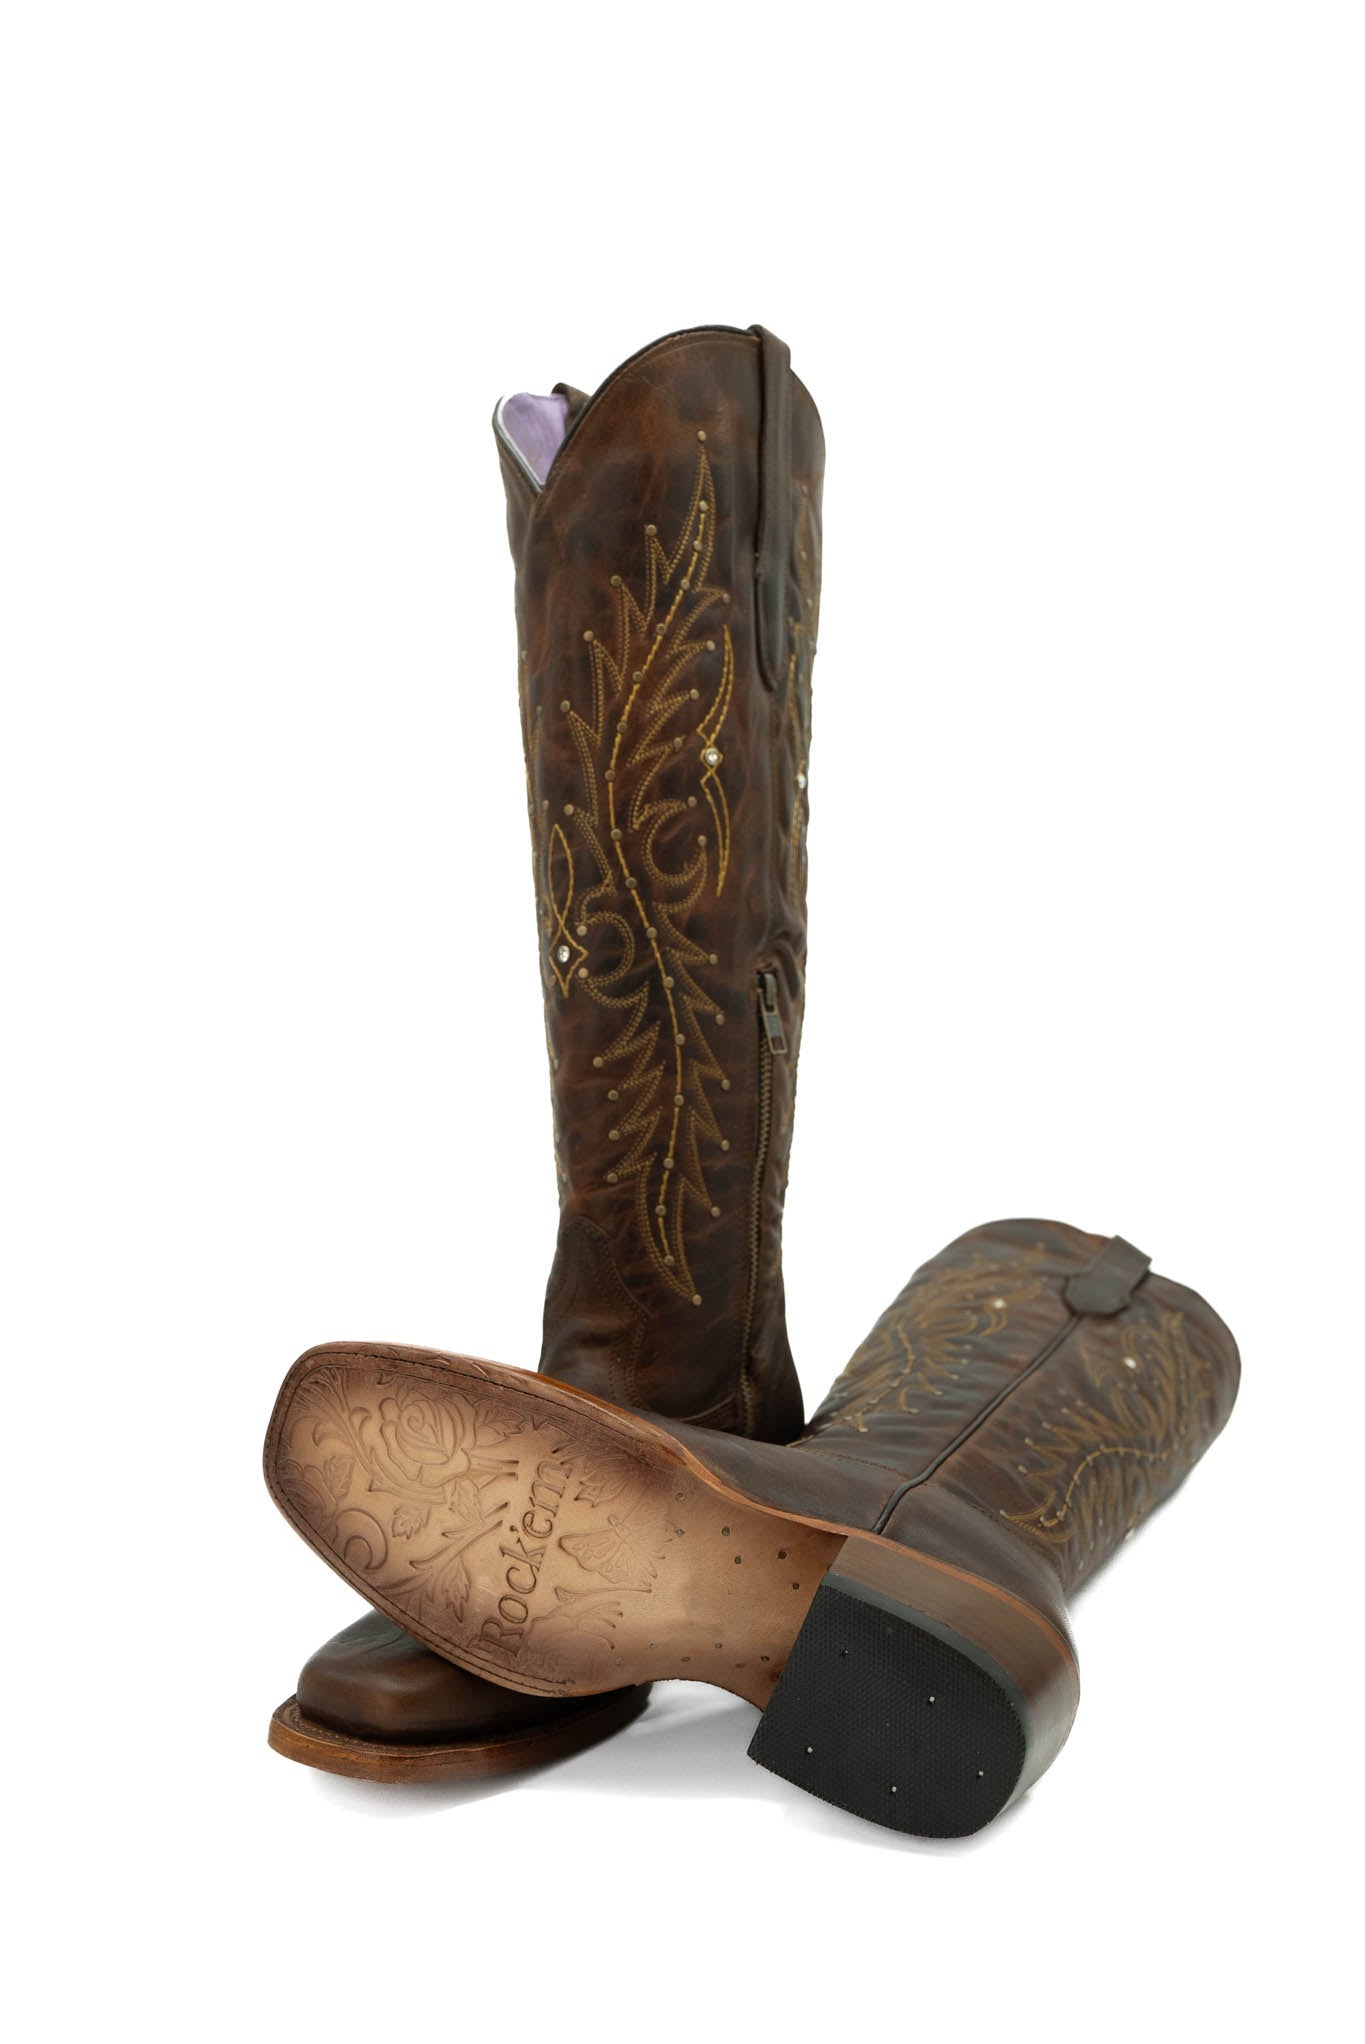 Paulina Rodeo Square Toe Tall Cowgirl Boot